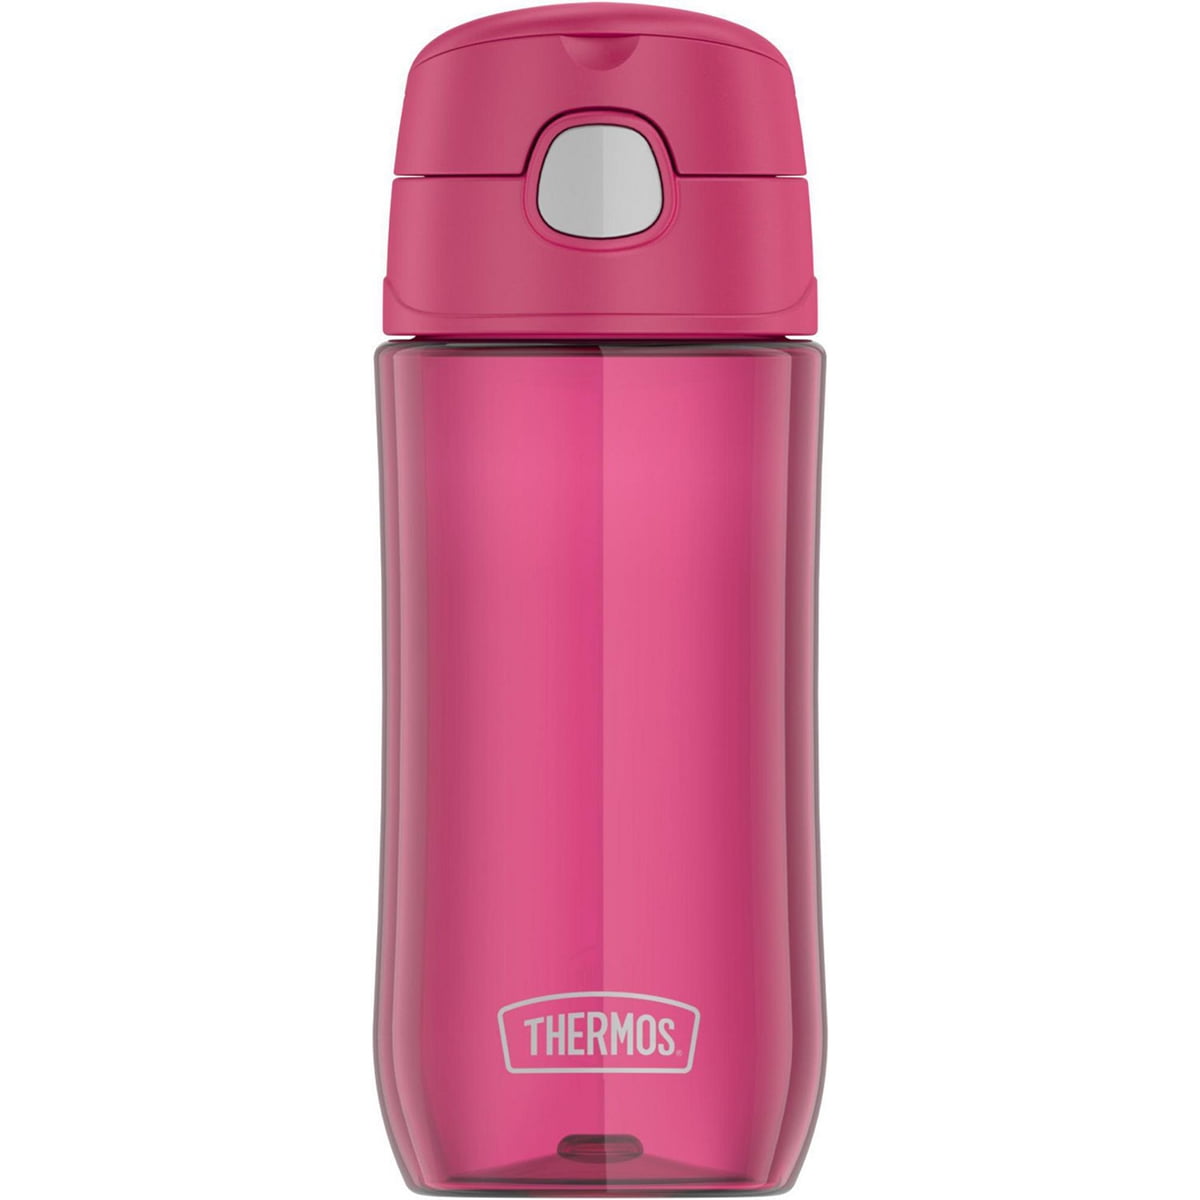 Thermos Stainless Steel Vacuum Insulated Funtainer Water Bottle, Pink  Dreamy, 16 fl oz